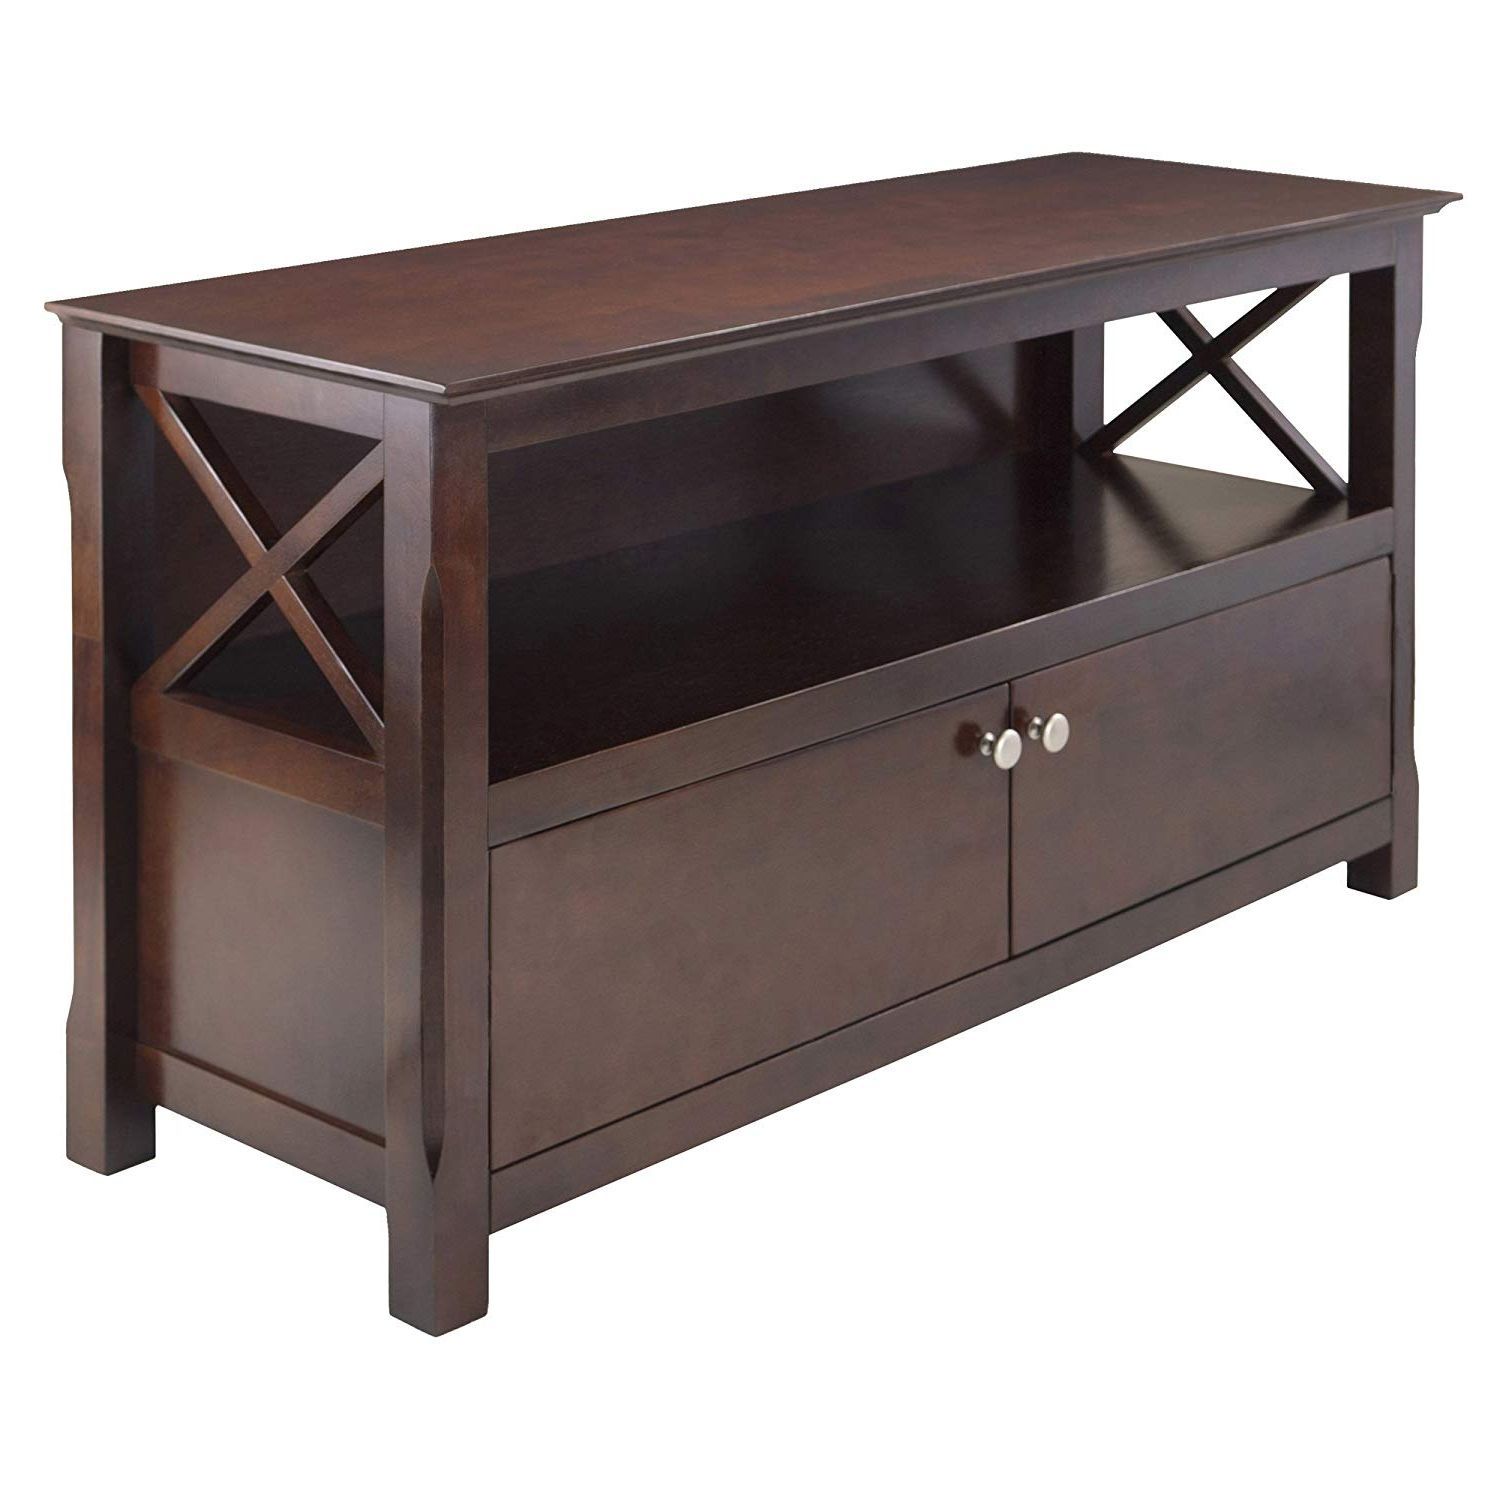 Amazon: Winsome Wood Xola Tv Stand: Kitchen & Dining Regarding Most Recently Released Wooden Tv Cabinets (View 2 of 20)